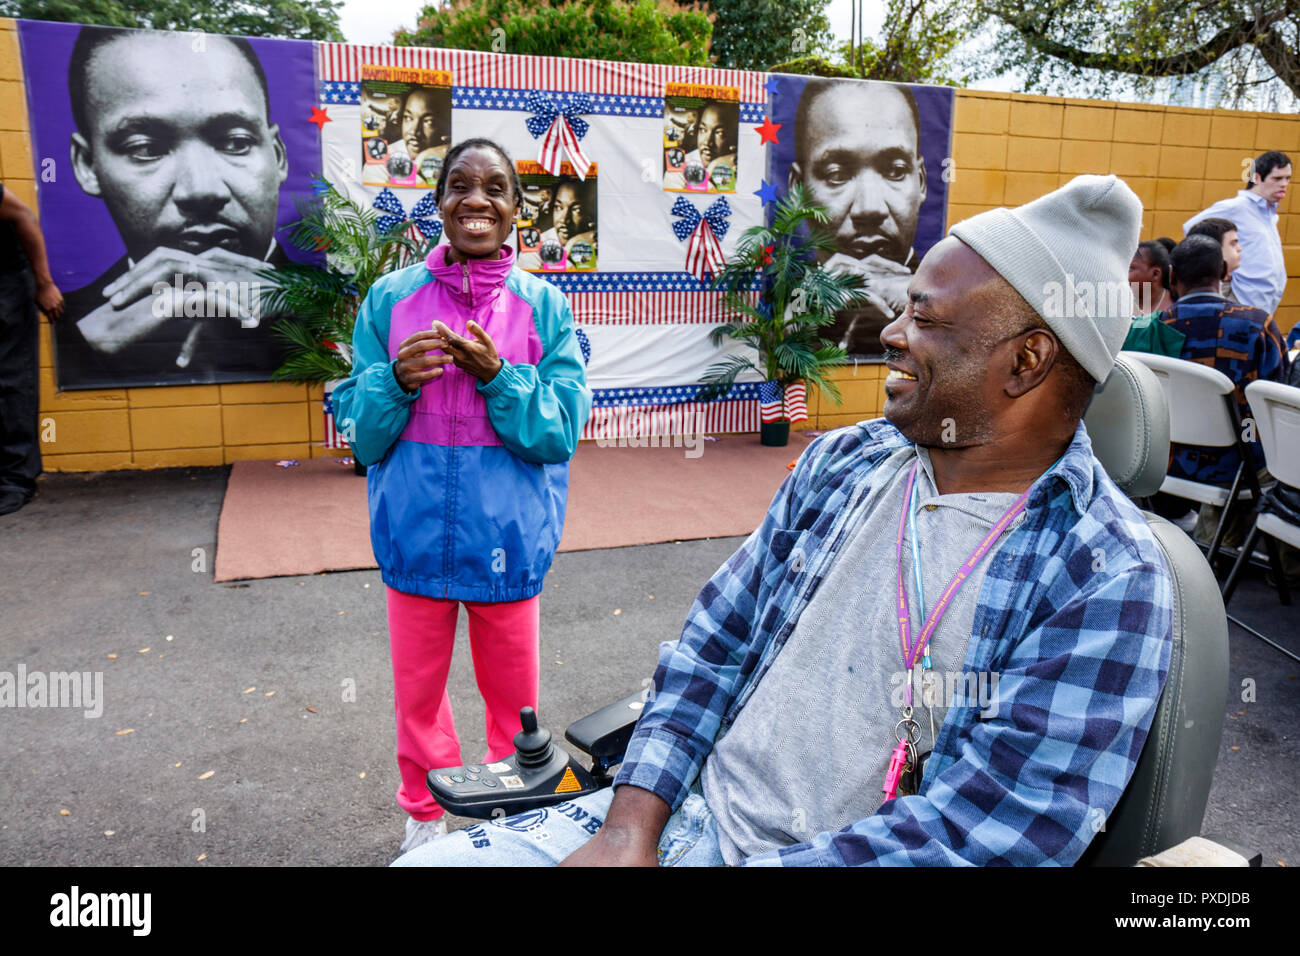 Miami Florida,Association for Development of Exceptional,ADE,MLK Day Carnival,Martin Luther King Jr.,developmentally disabled,mental,mentally,physical Stock Photo